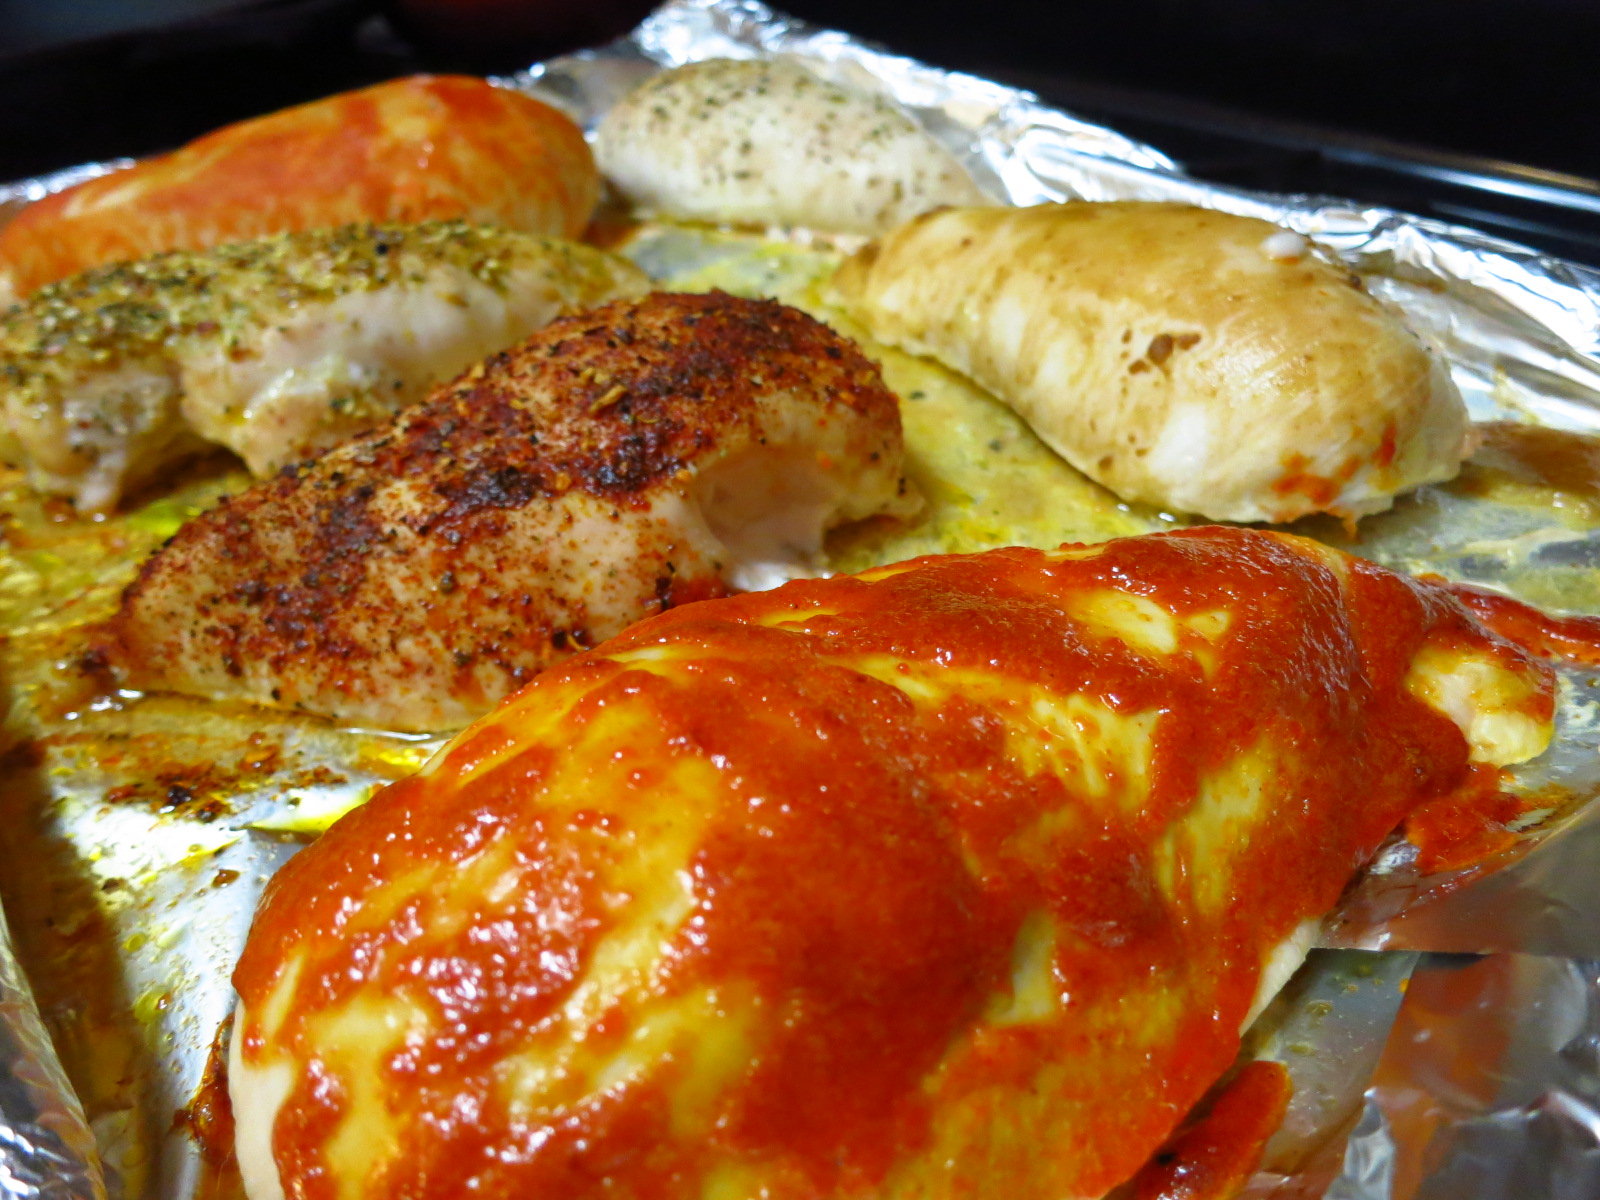 Baked chicken breasts: varieties are endless!